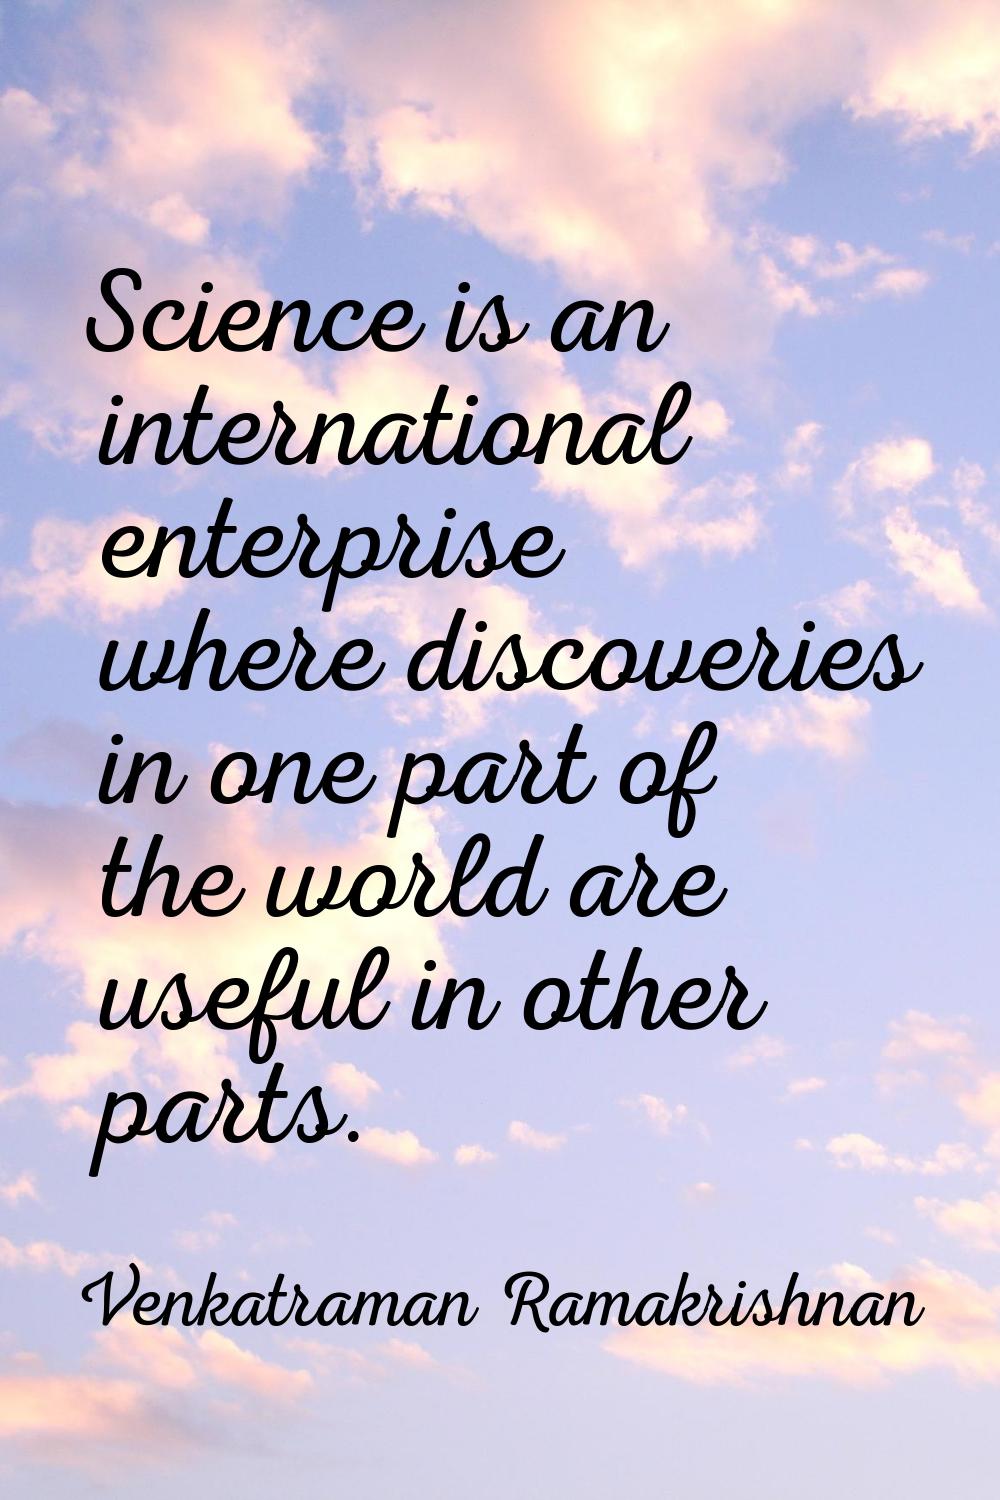 Science is an international enterprise where discoveries in one part of the world are useful in oth